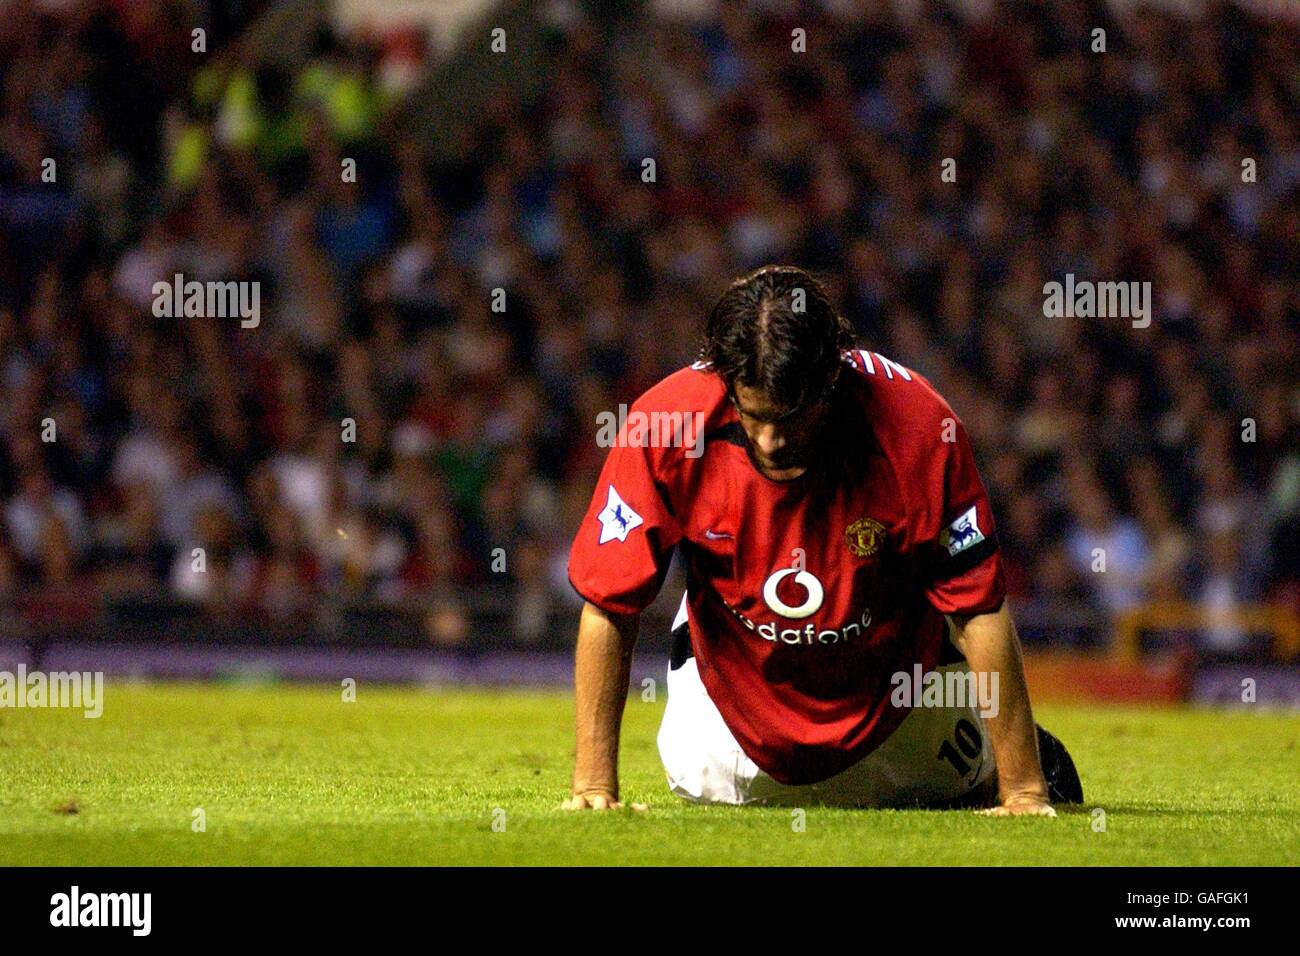 Soccer - FA Barclaycard Premiership - Manchester United v Bolton Wanderers. A dejected Ruud Van Nistelrooy of Manchester United after missing the goal Stock Photo